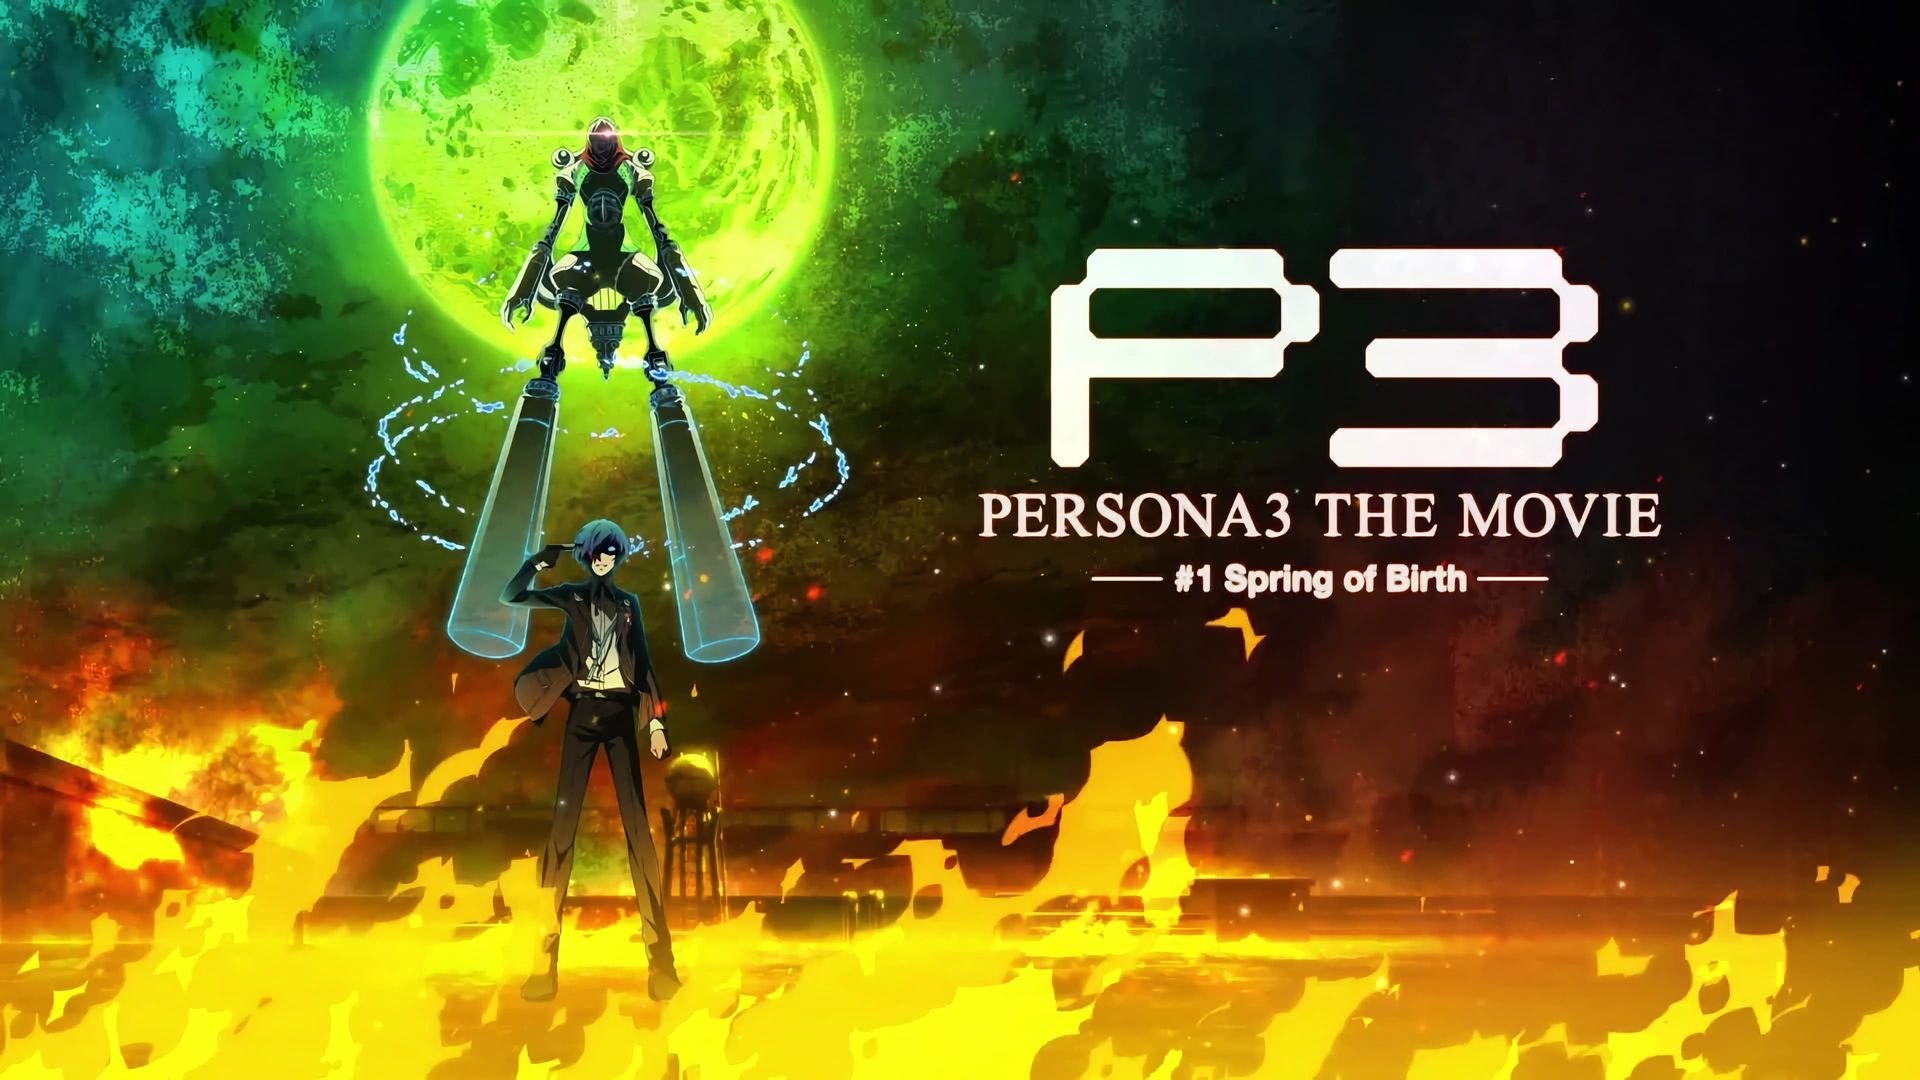 Persona 3 the Movie: #1 Spring of Birth background